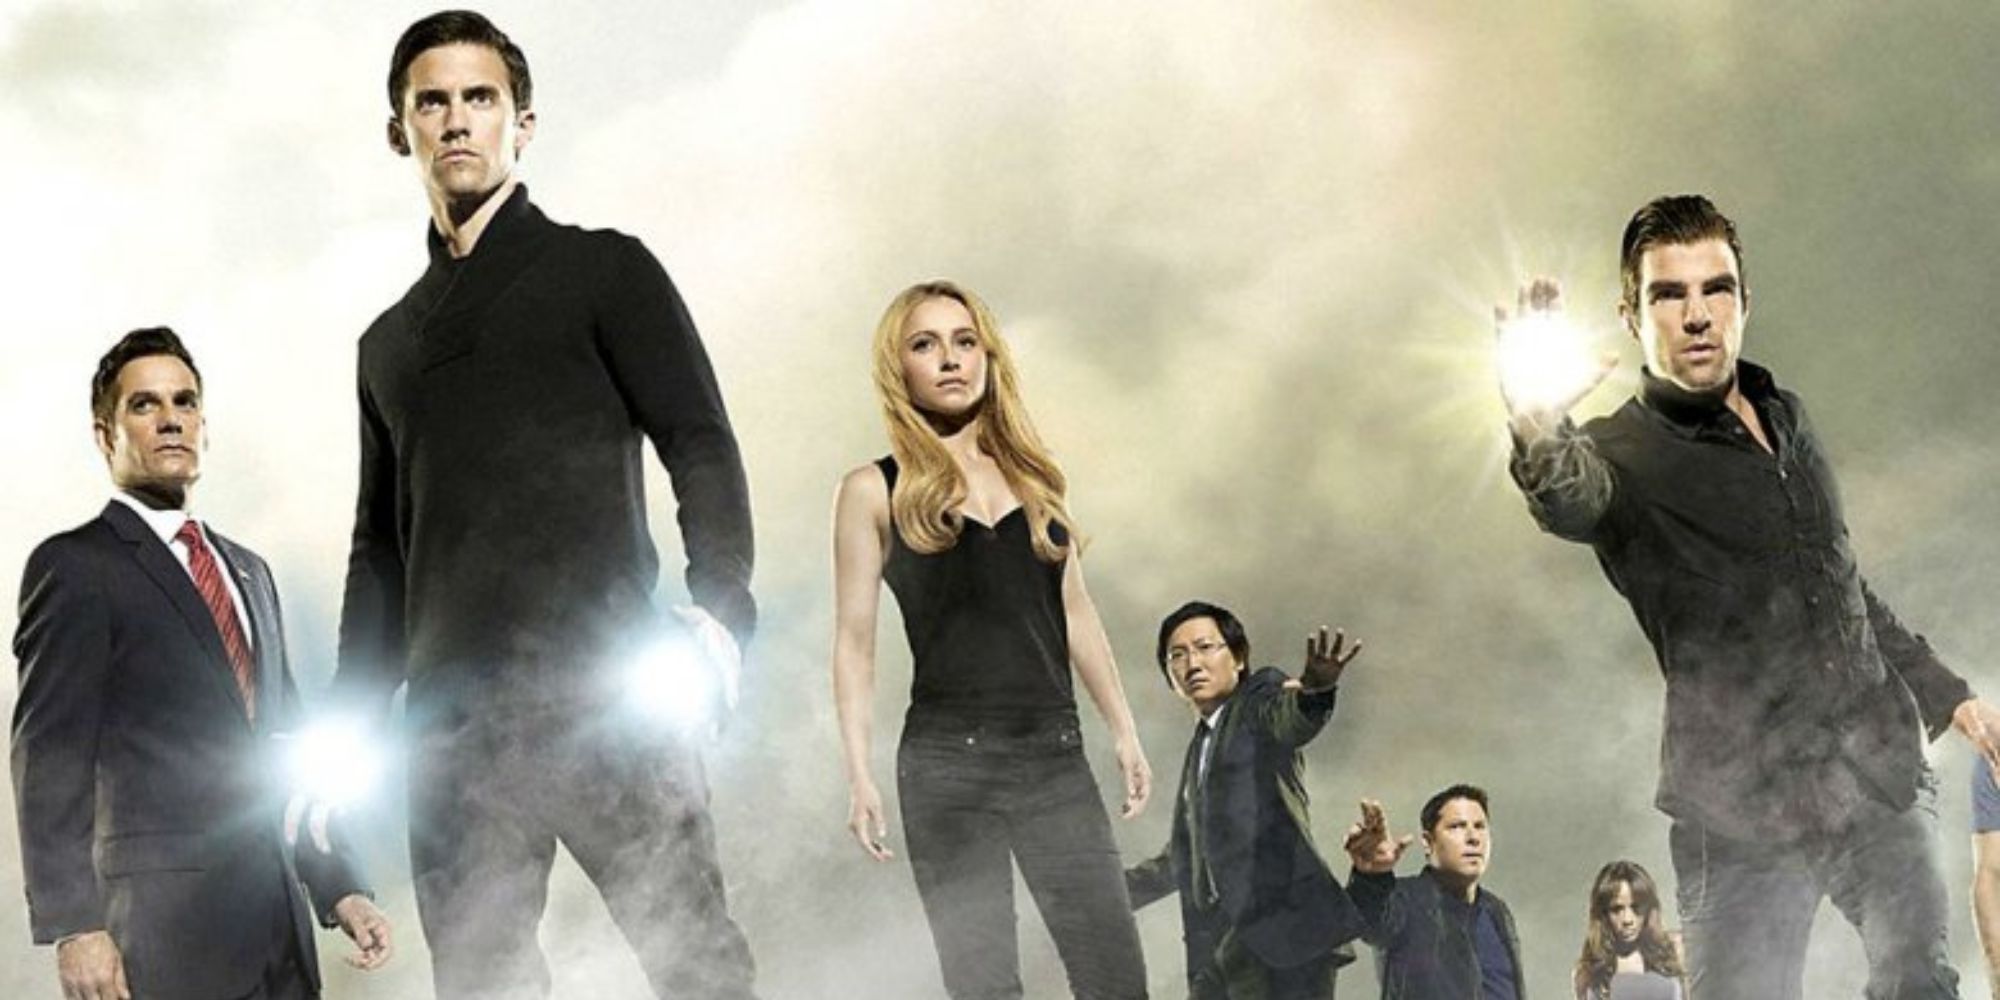 The main characters of the series Heroes on the promotional image for the series.